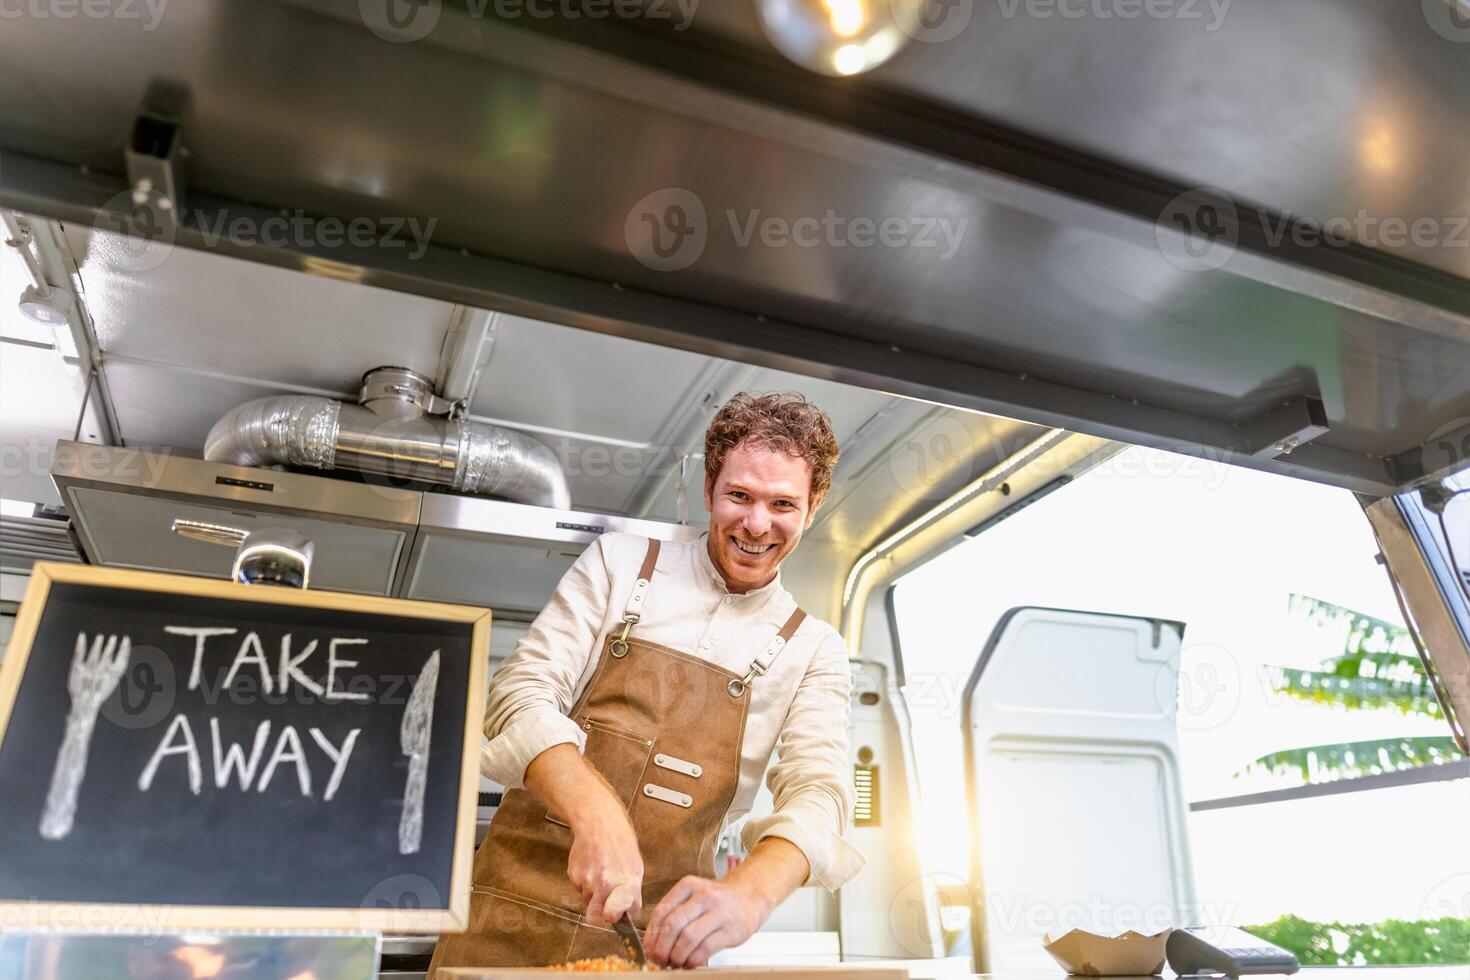 Food truck owner preparing meal recipe - Modern kitchen business and take away concept photo